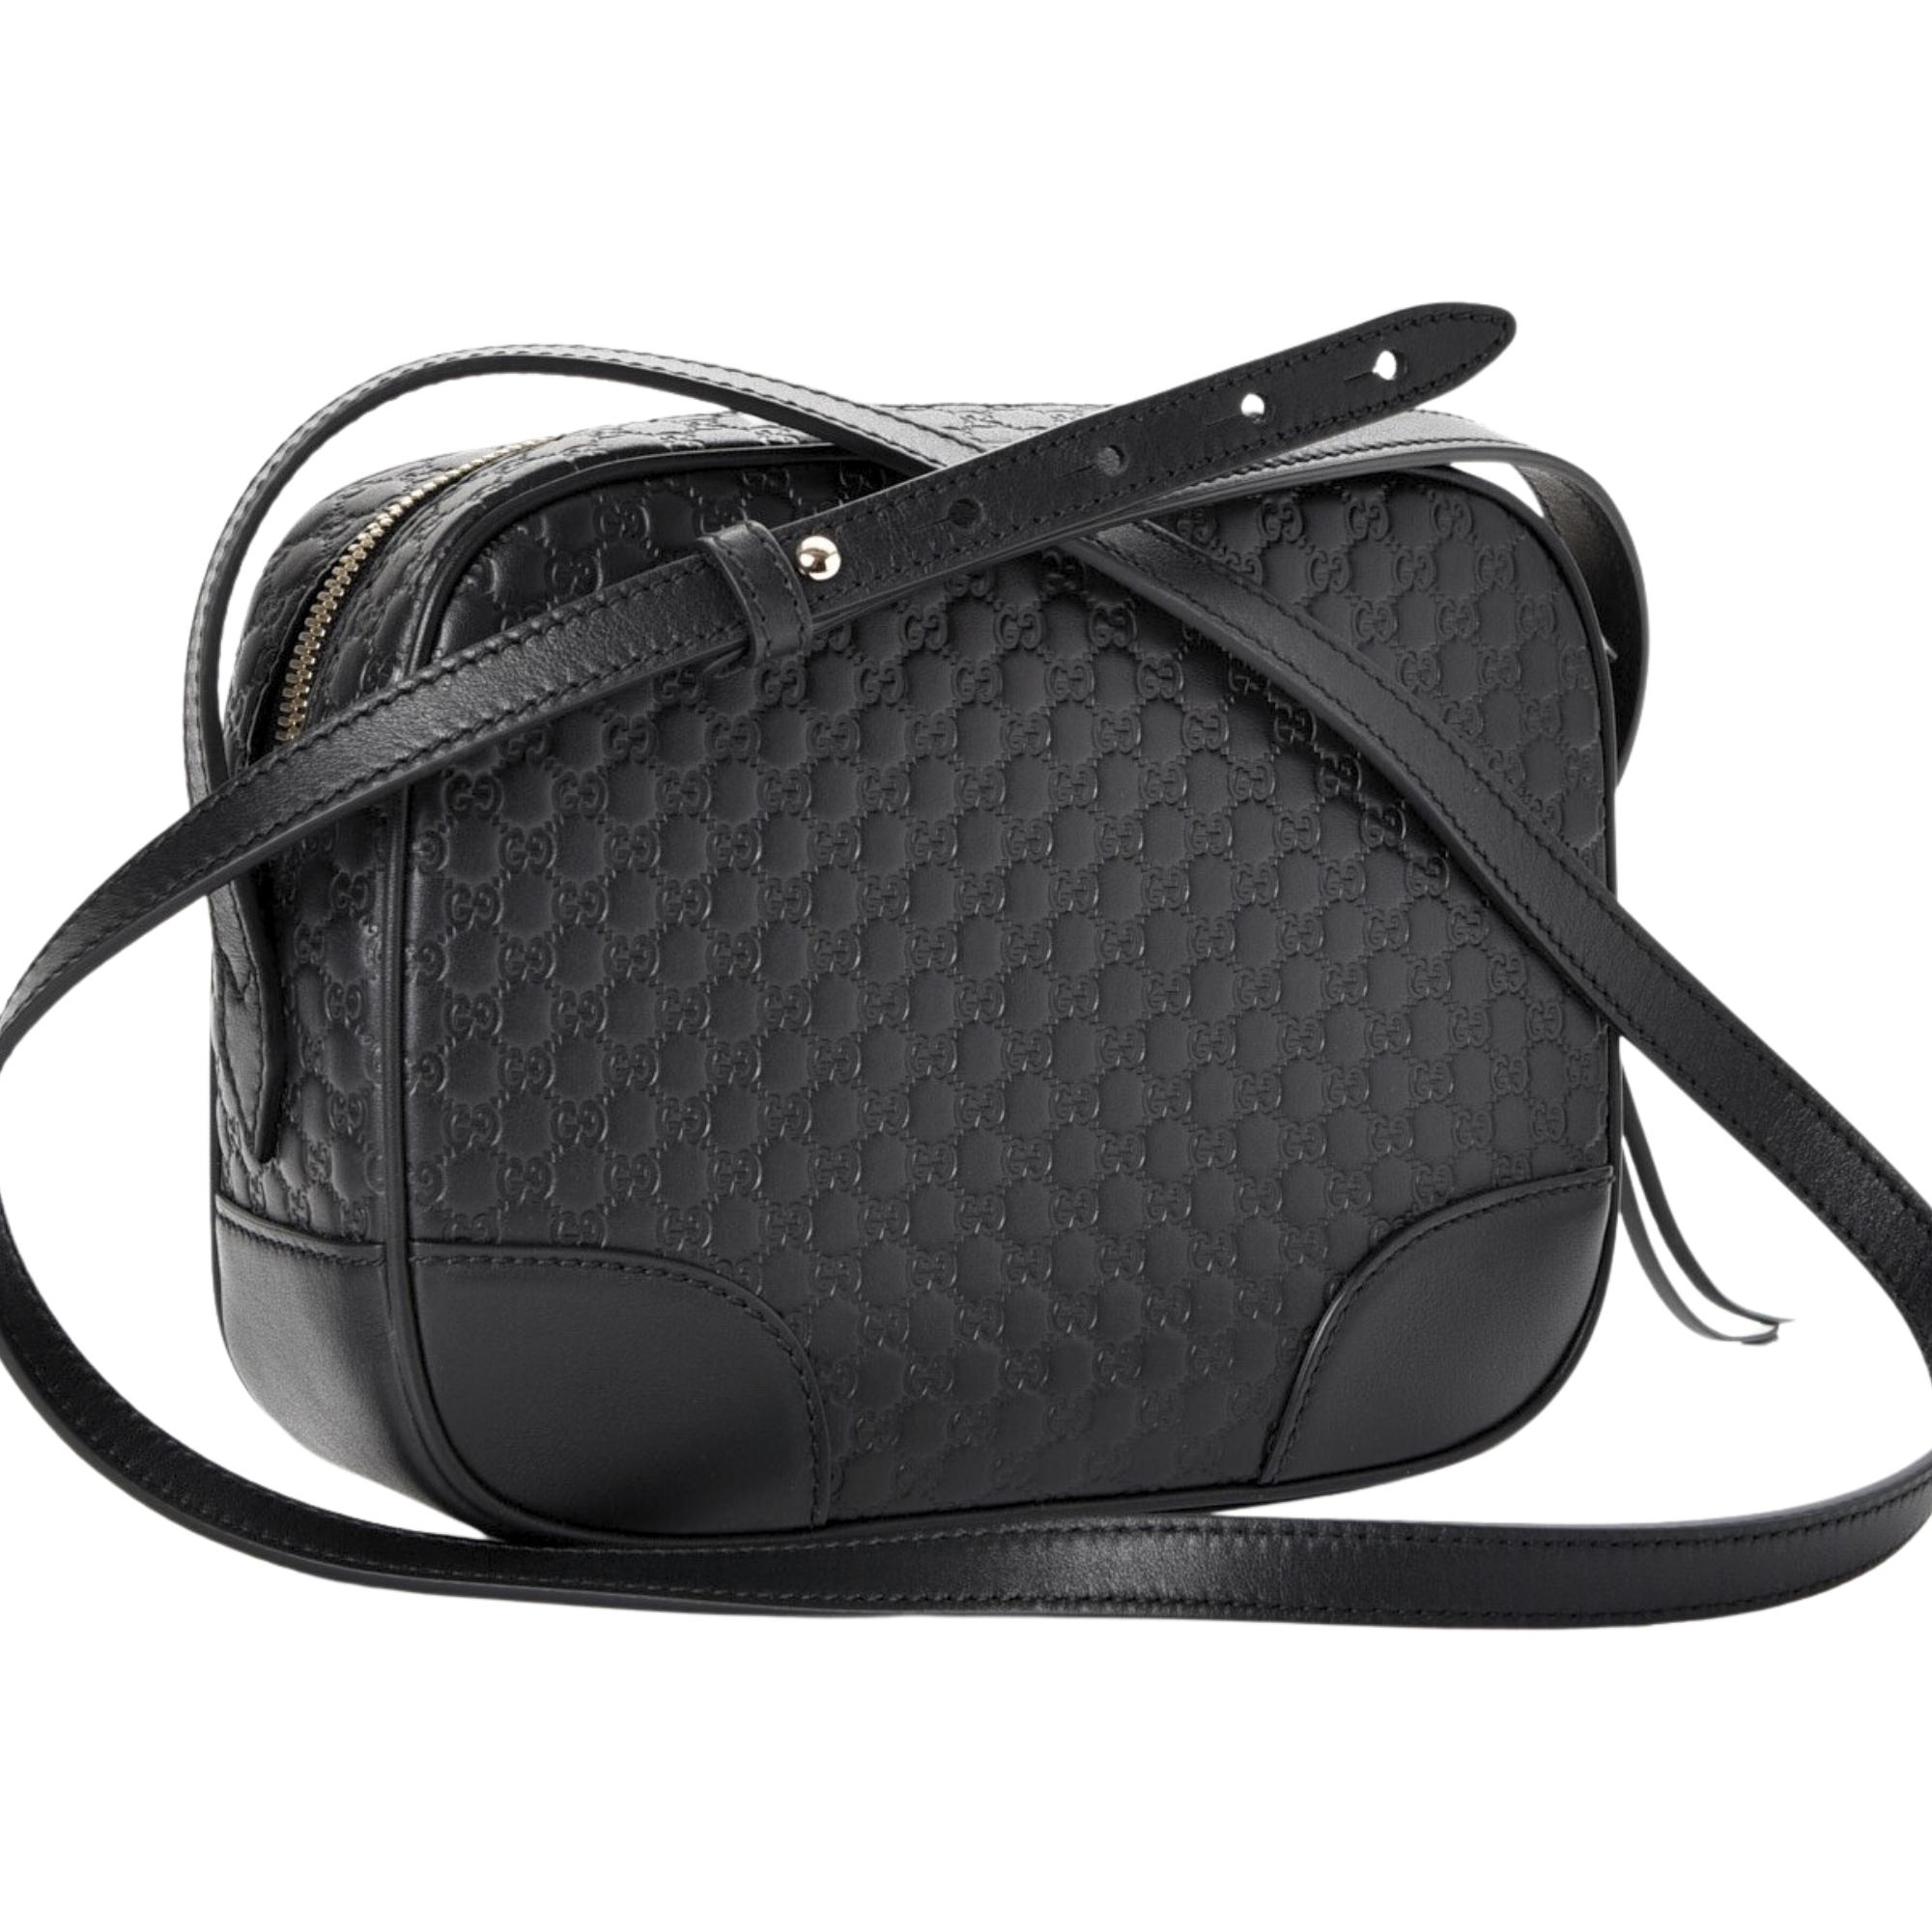 This Gucci bag is made with embossed calfskin leather in black. The bag features Gucci’s iconic microguccisima embossed leather, light-gold hardware, an adjustable shoulder strap and top zip closure. The doubler zipper tabs open to a beige canvas